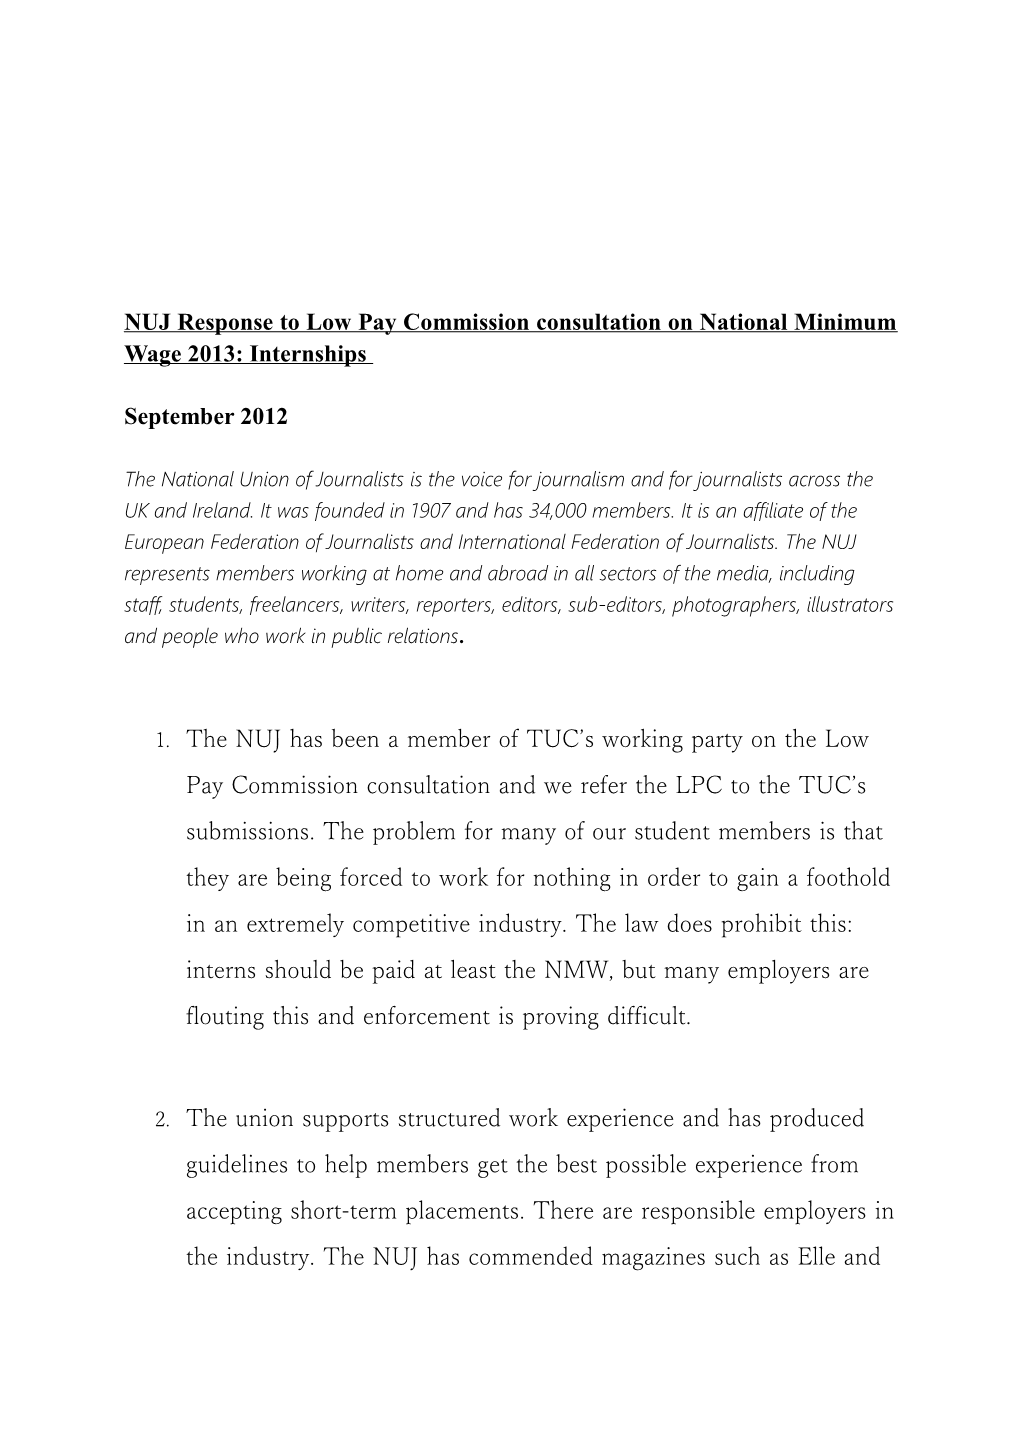 NUJ Response to Low Pay Commission Consultation on National Minimum Wage 2013: Internships